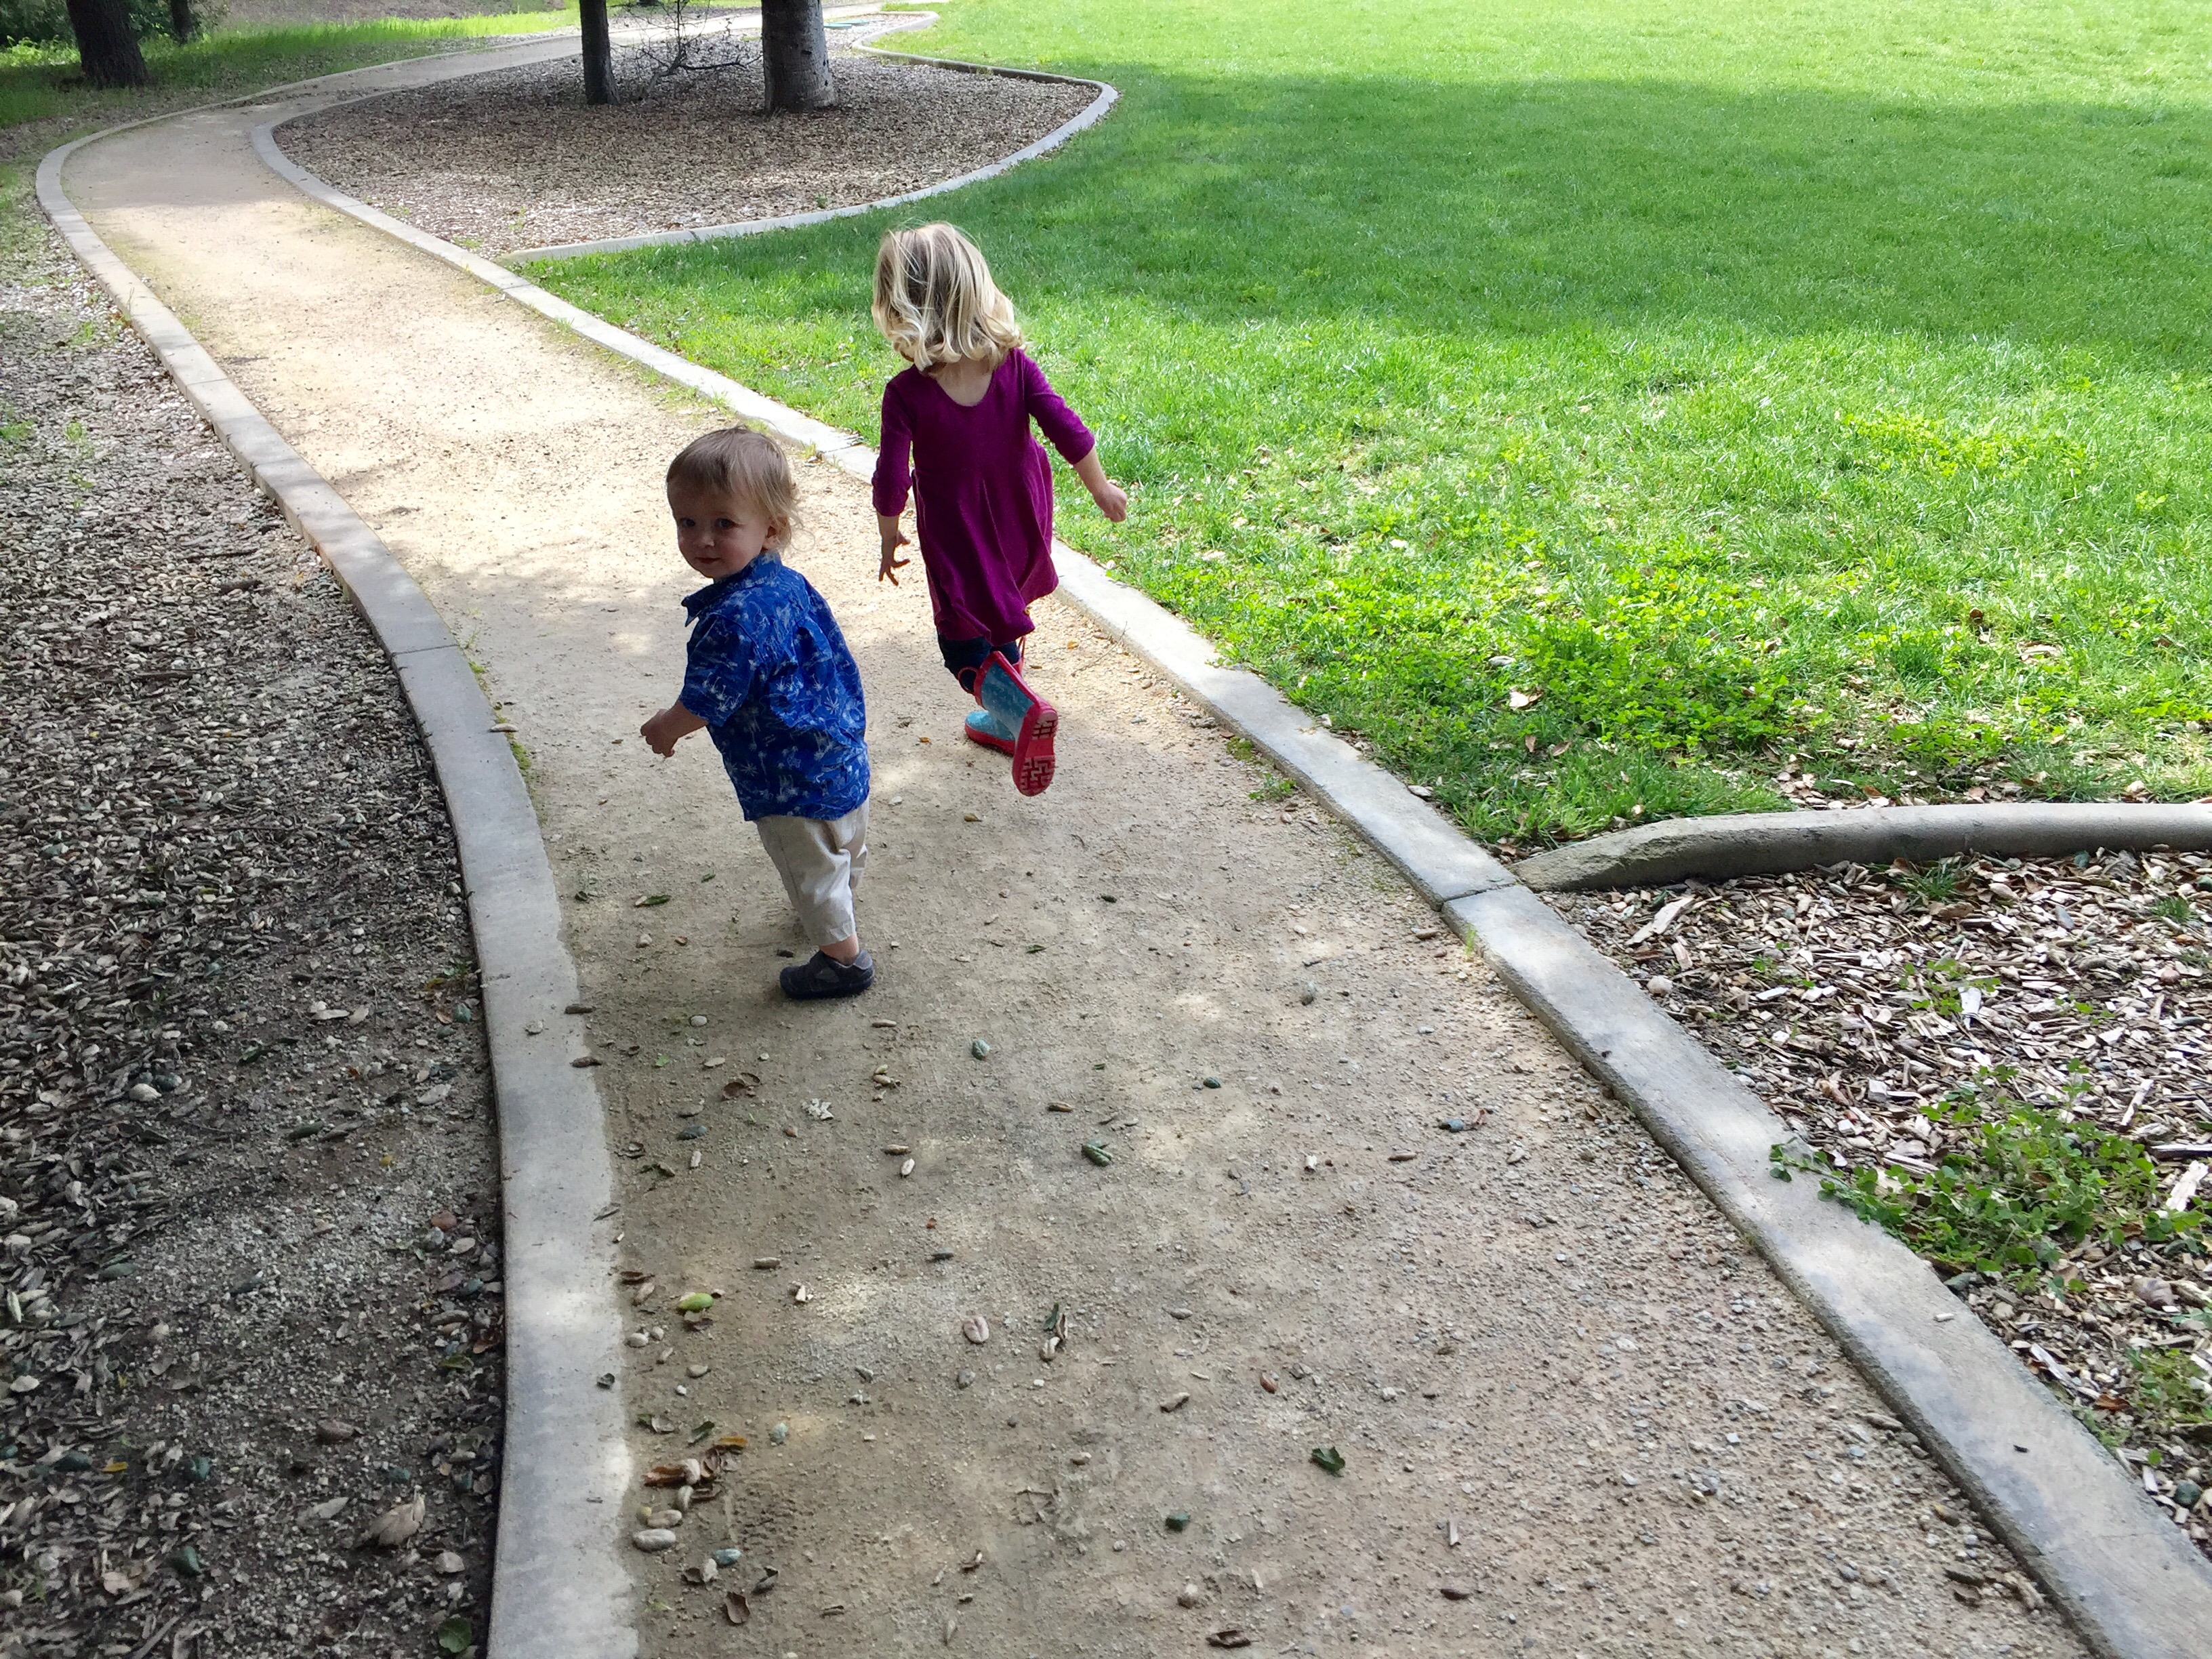 Overall, this park is a hit for us when we want to a low-key way to be outside.